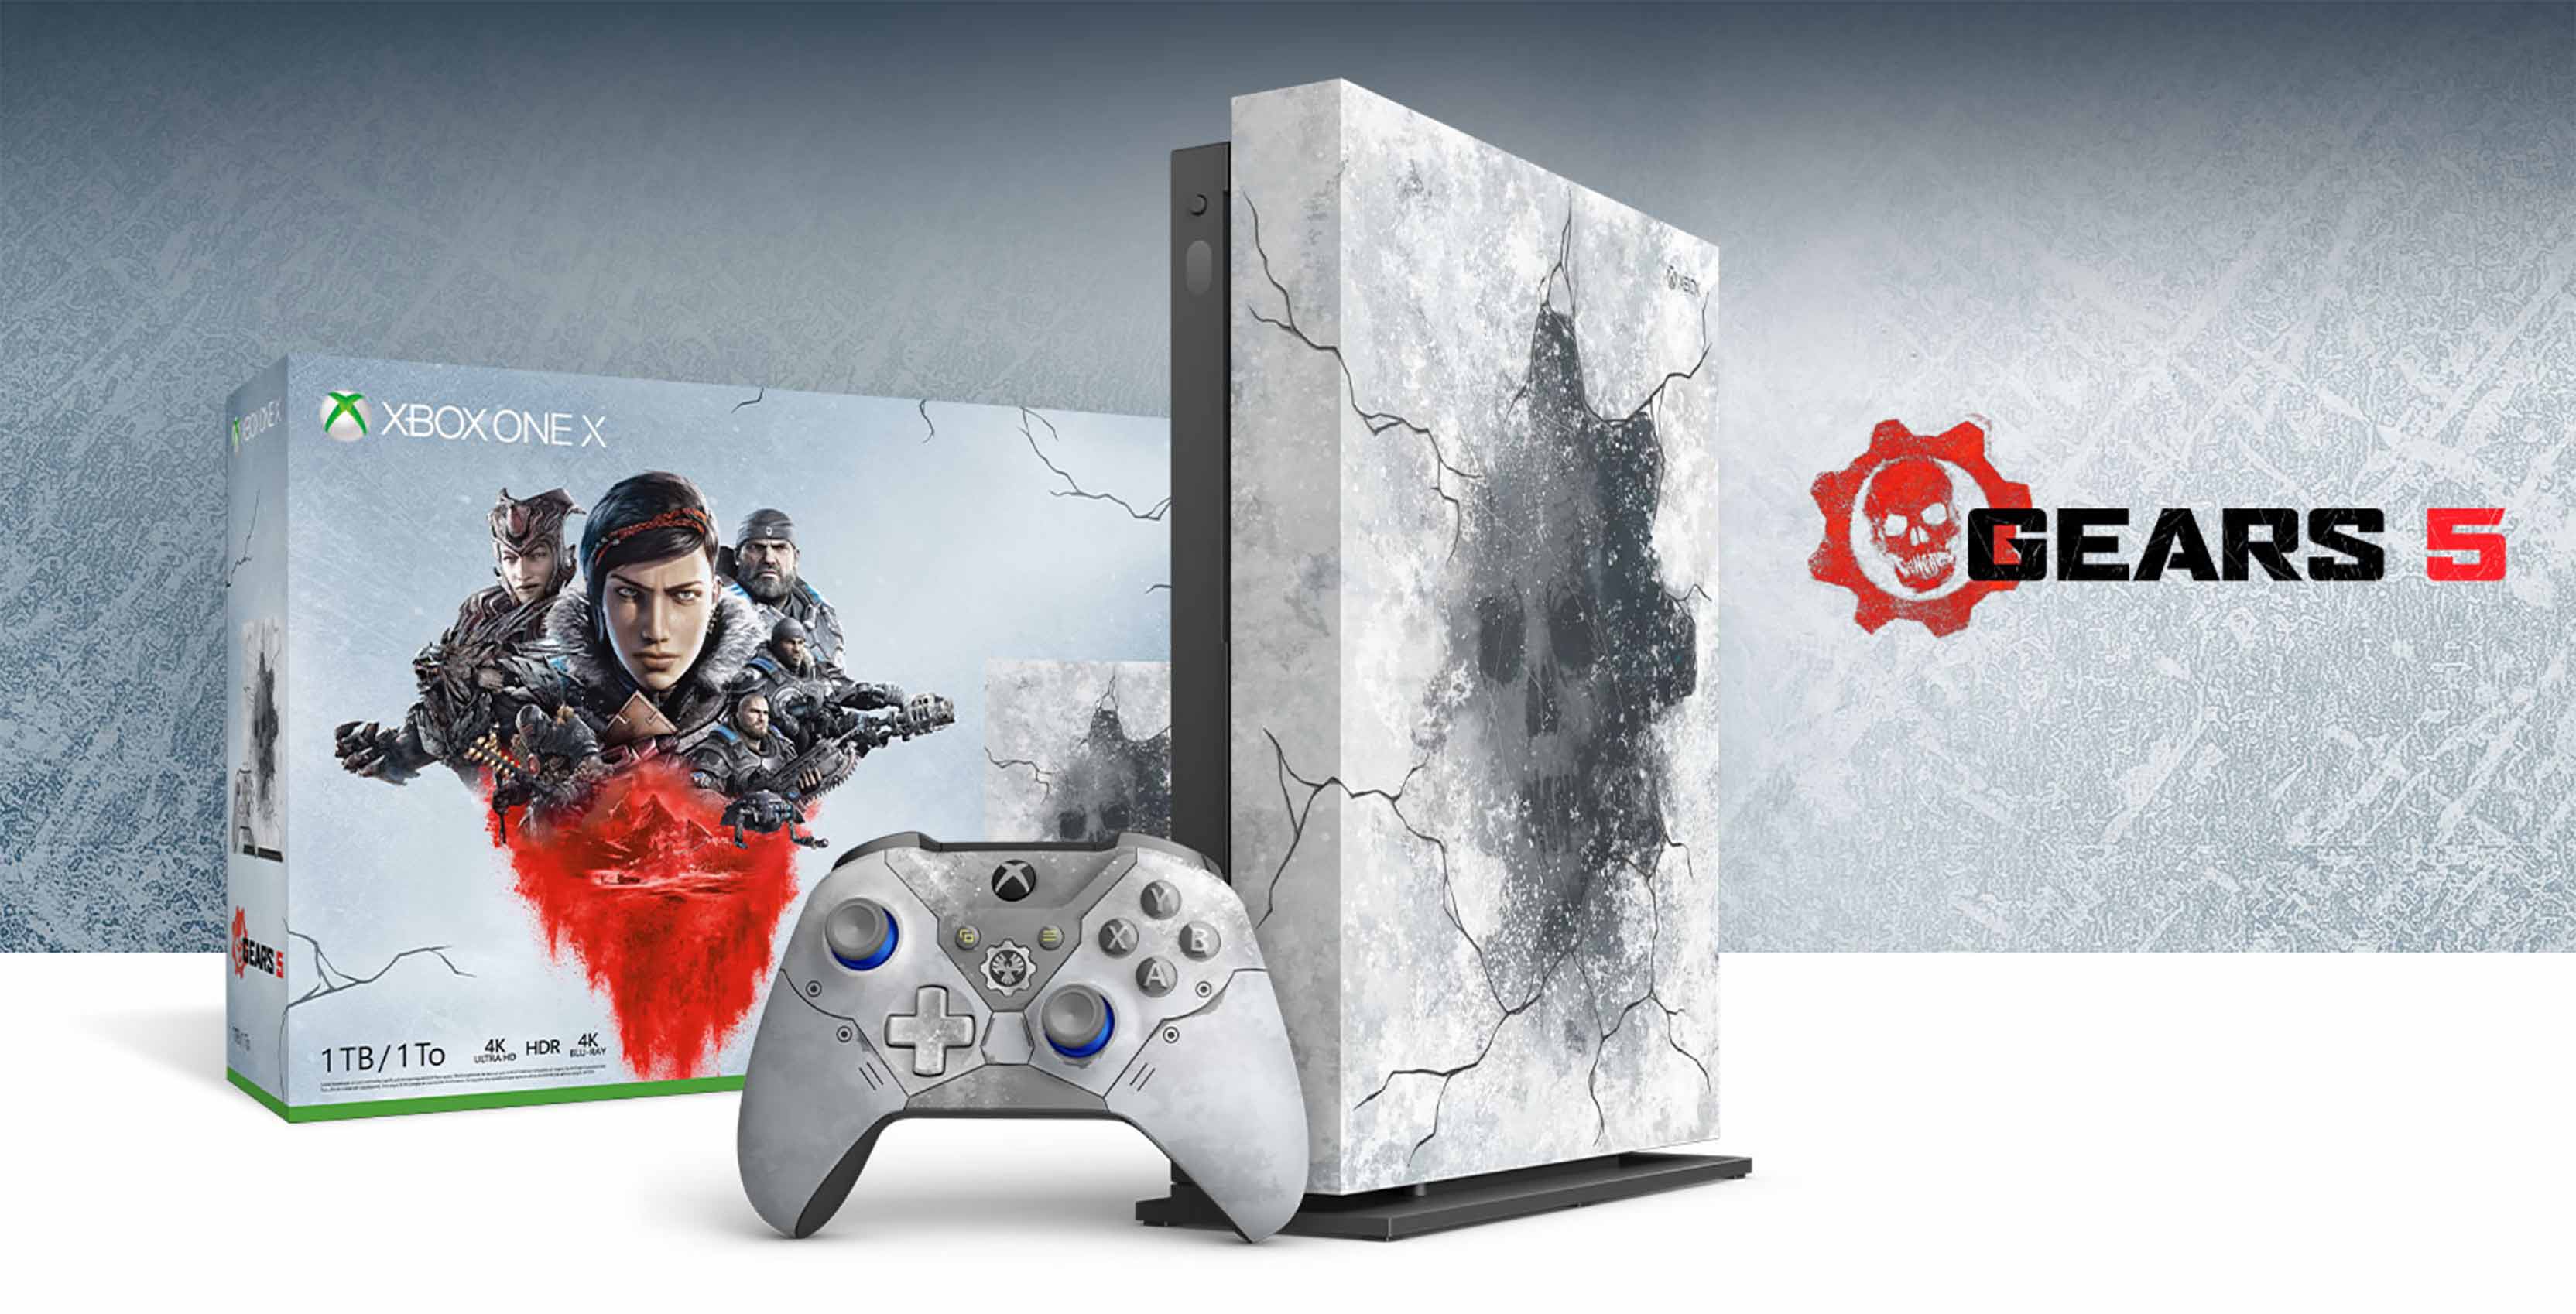 Microsoft unveils limited edition Gears 5-themed Xbox One X